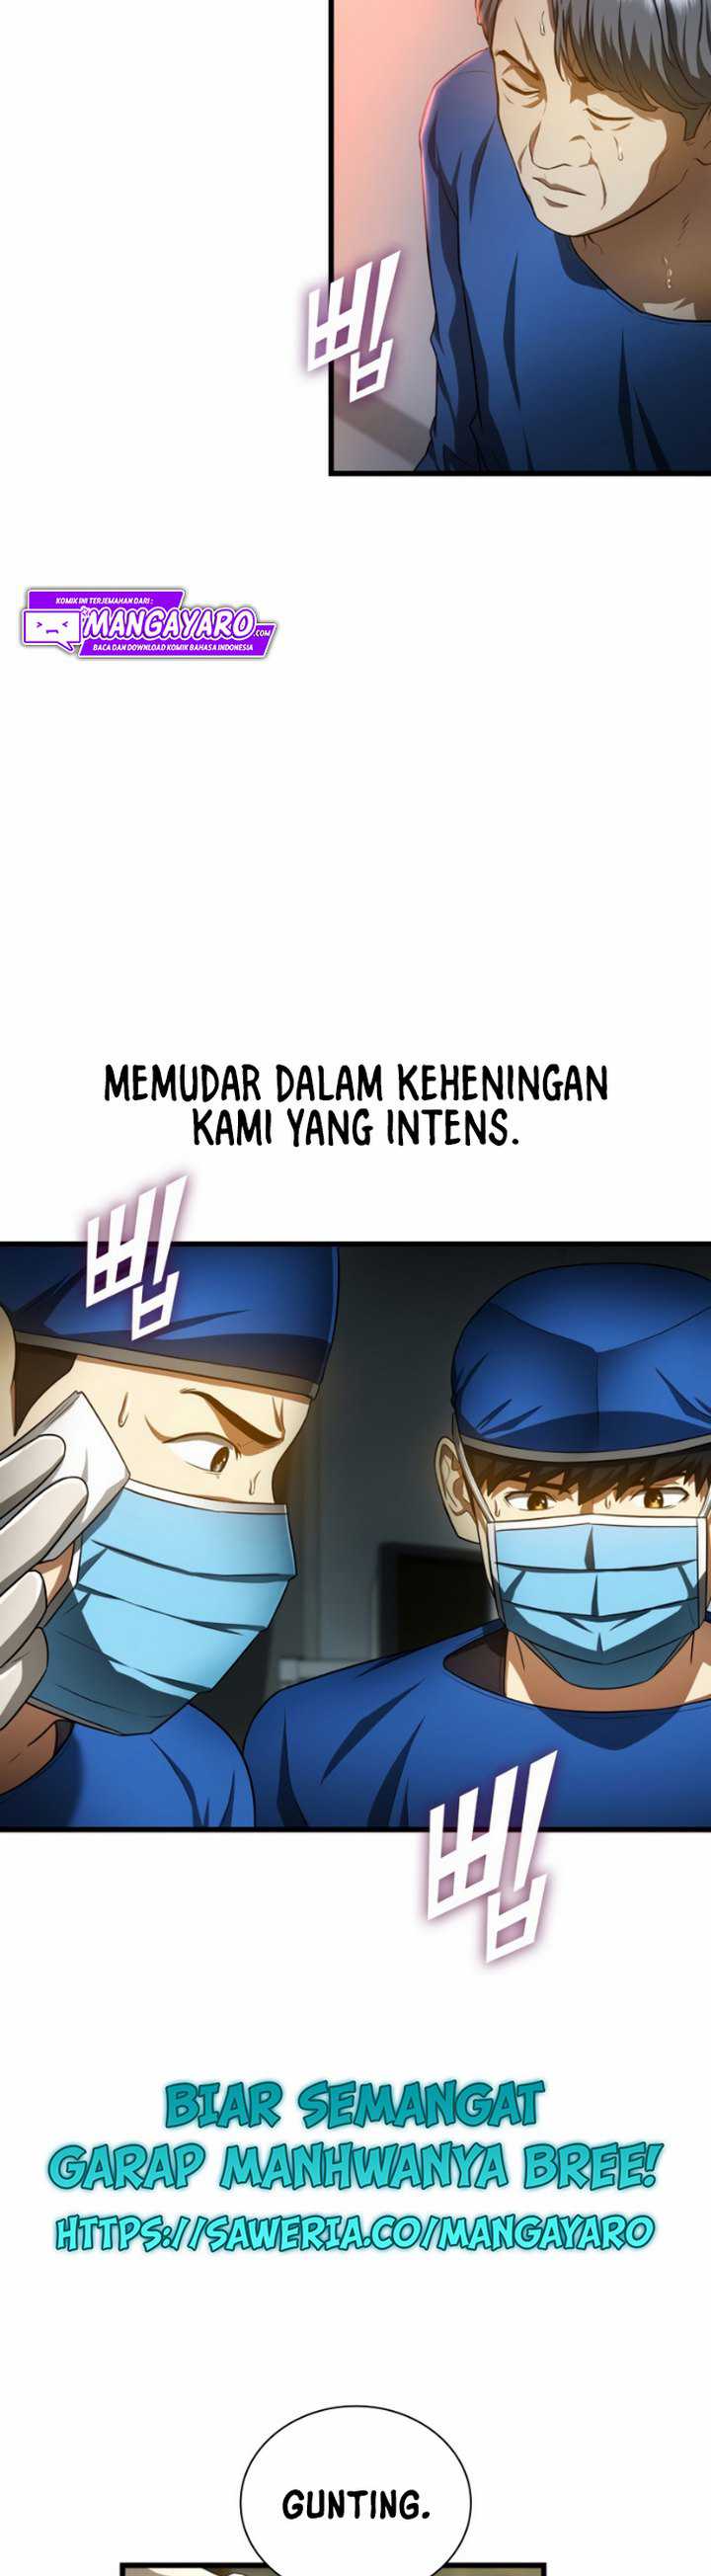 Perfect Surgeon Chapter 21.1